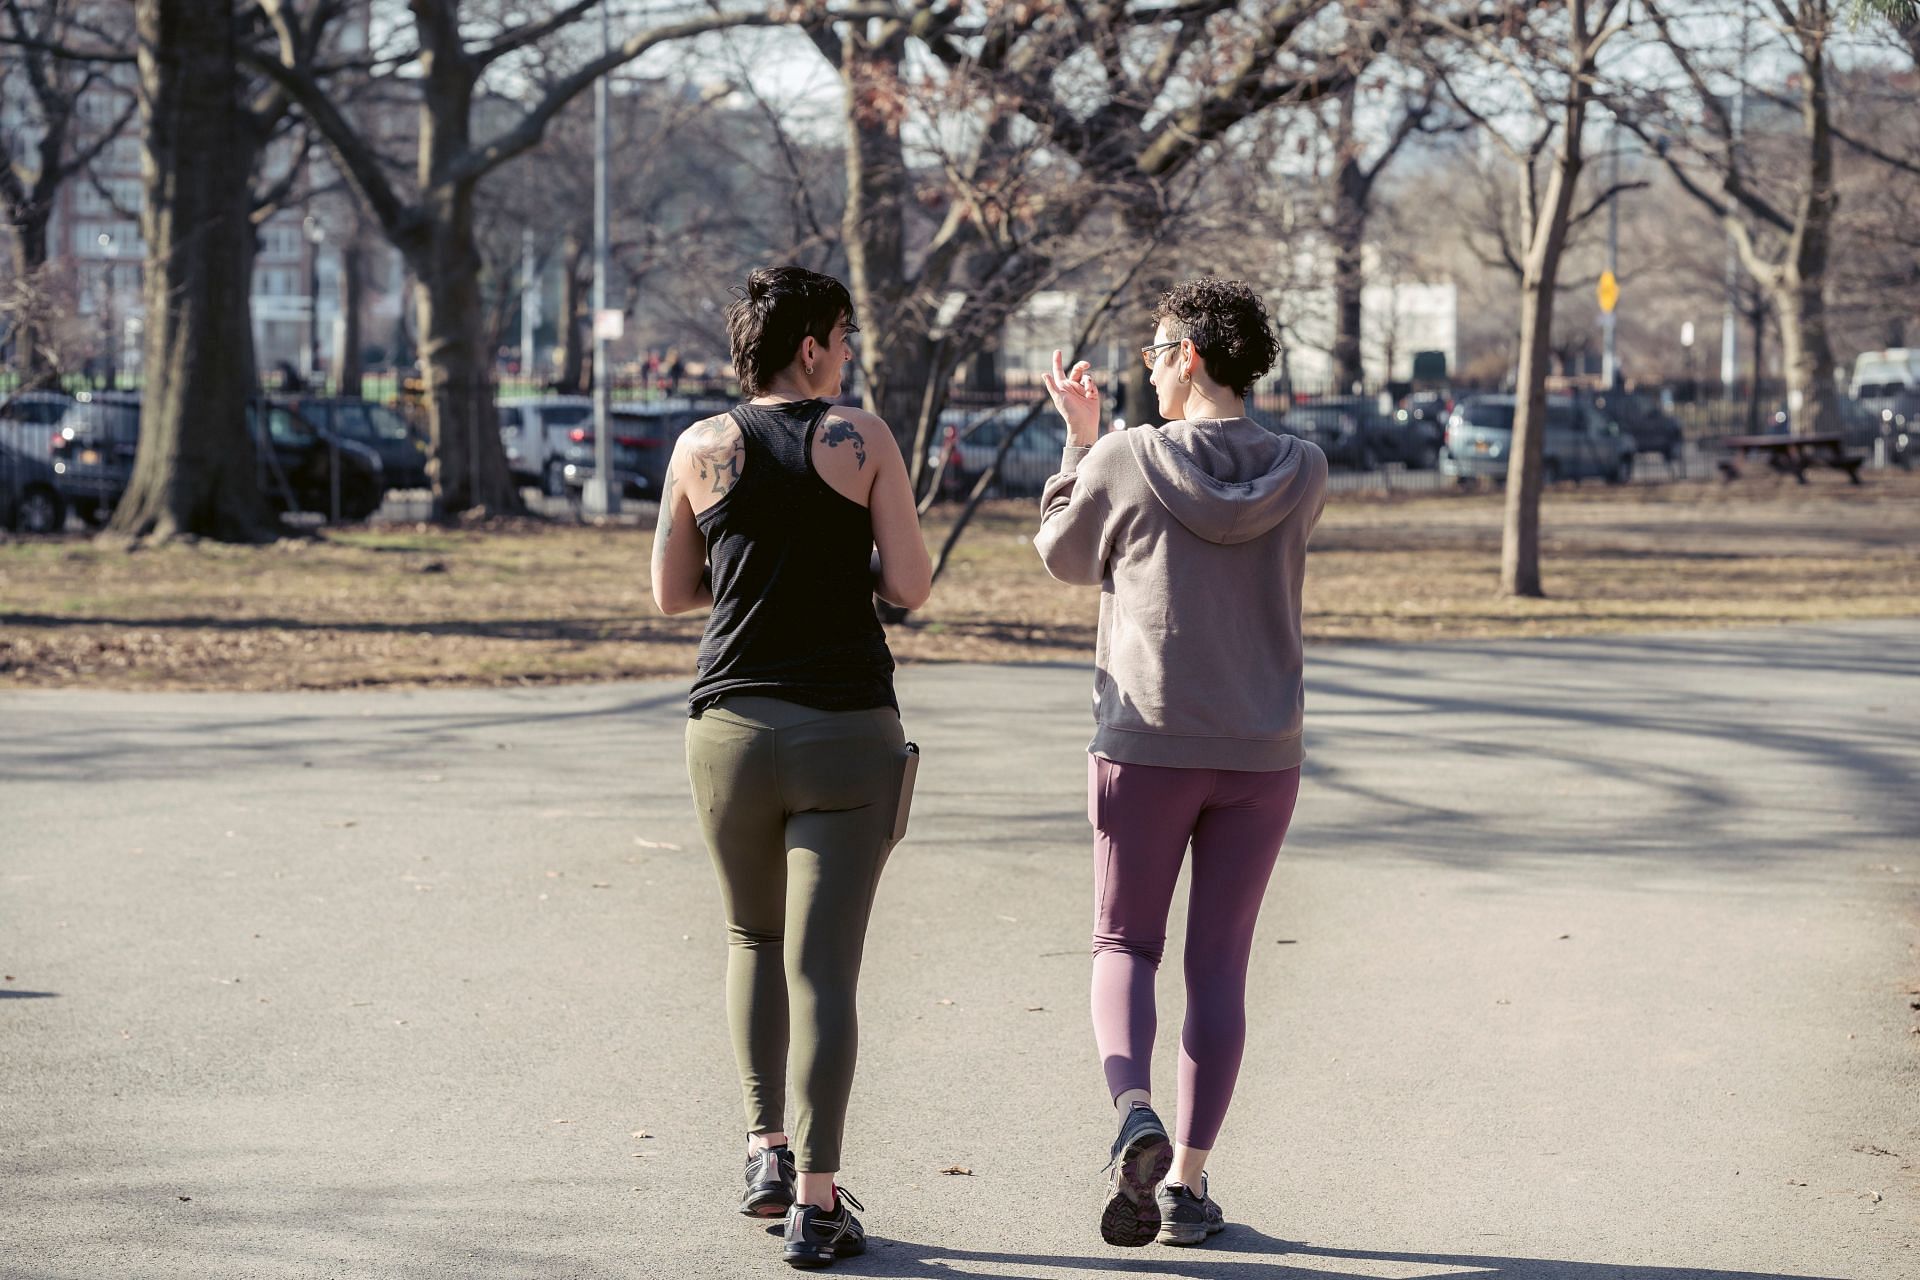 Exercise can help in reducing excess belly fat. (Image via Pexels/Sarah Chai)